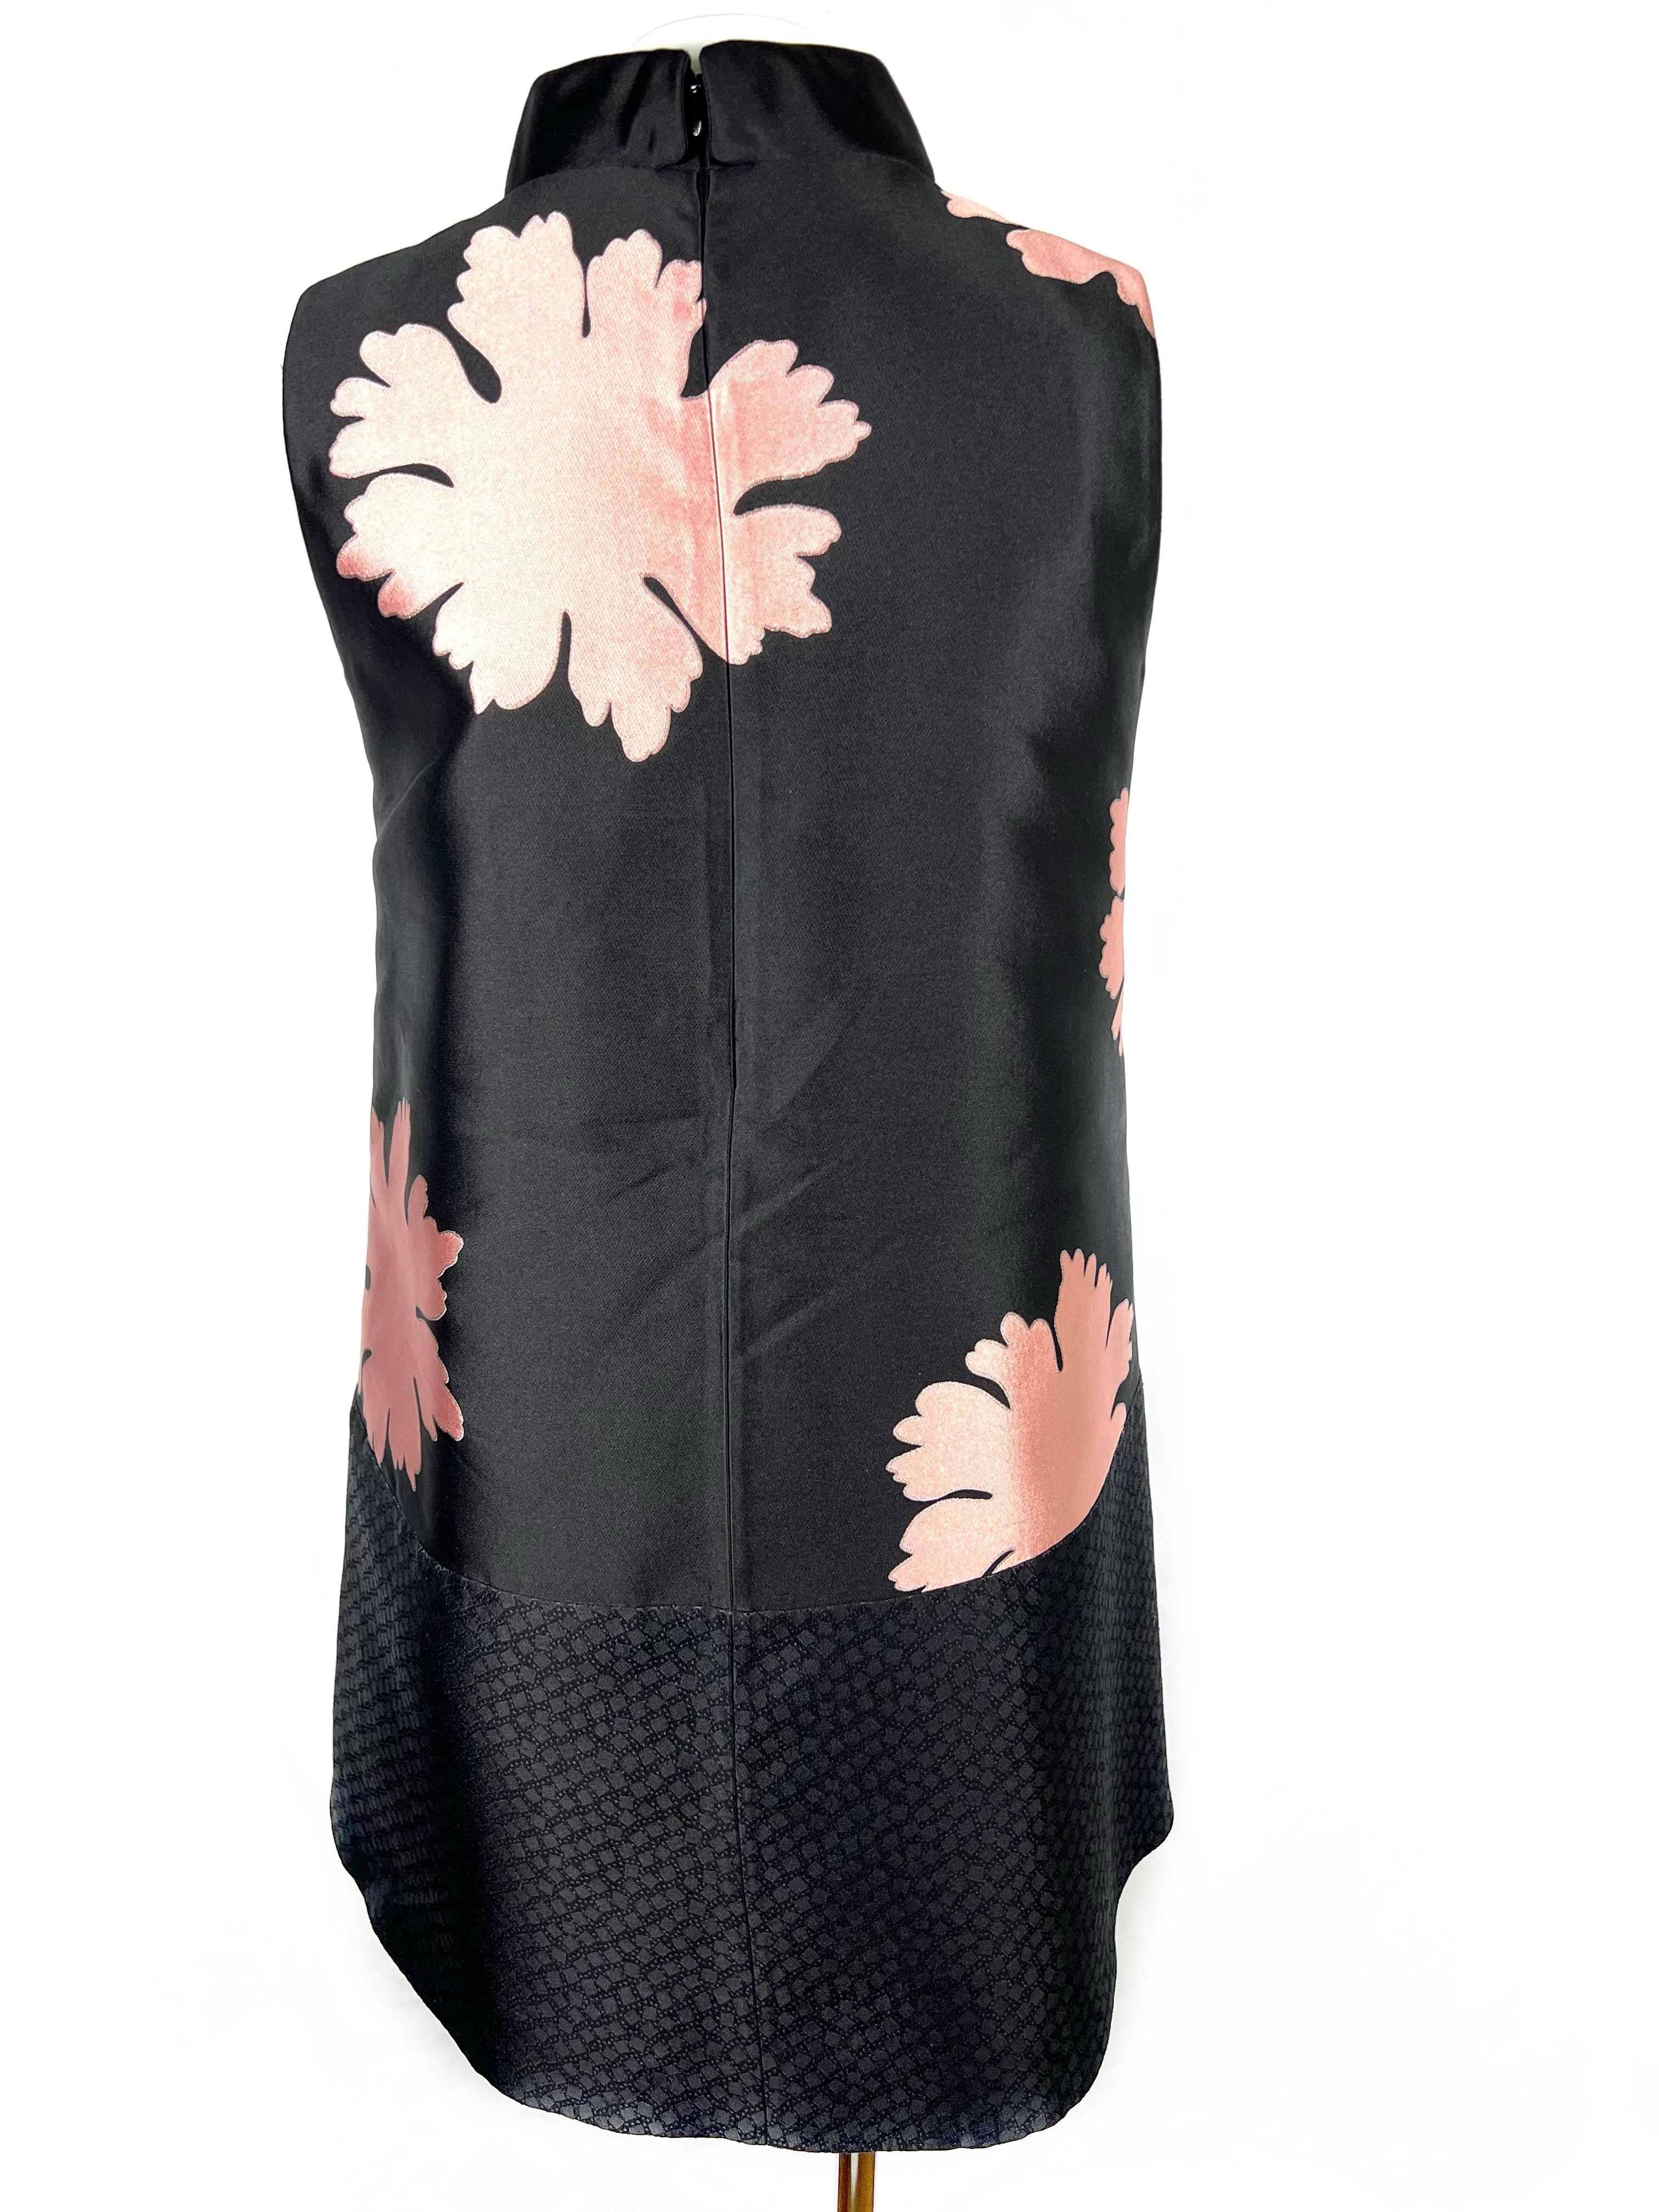 Alexander McQueen Mini Dress Black and Pink, Size Small
- Floral print
- Mini length 
- Sleeveless
- Mandarin collar
- Hidden rear zip closure
- Missing tags 

Item details:
A floral black mini A-line dress by Alexander McQueen.
​The contrast color